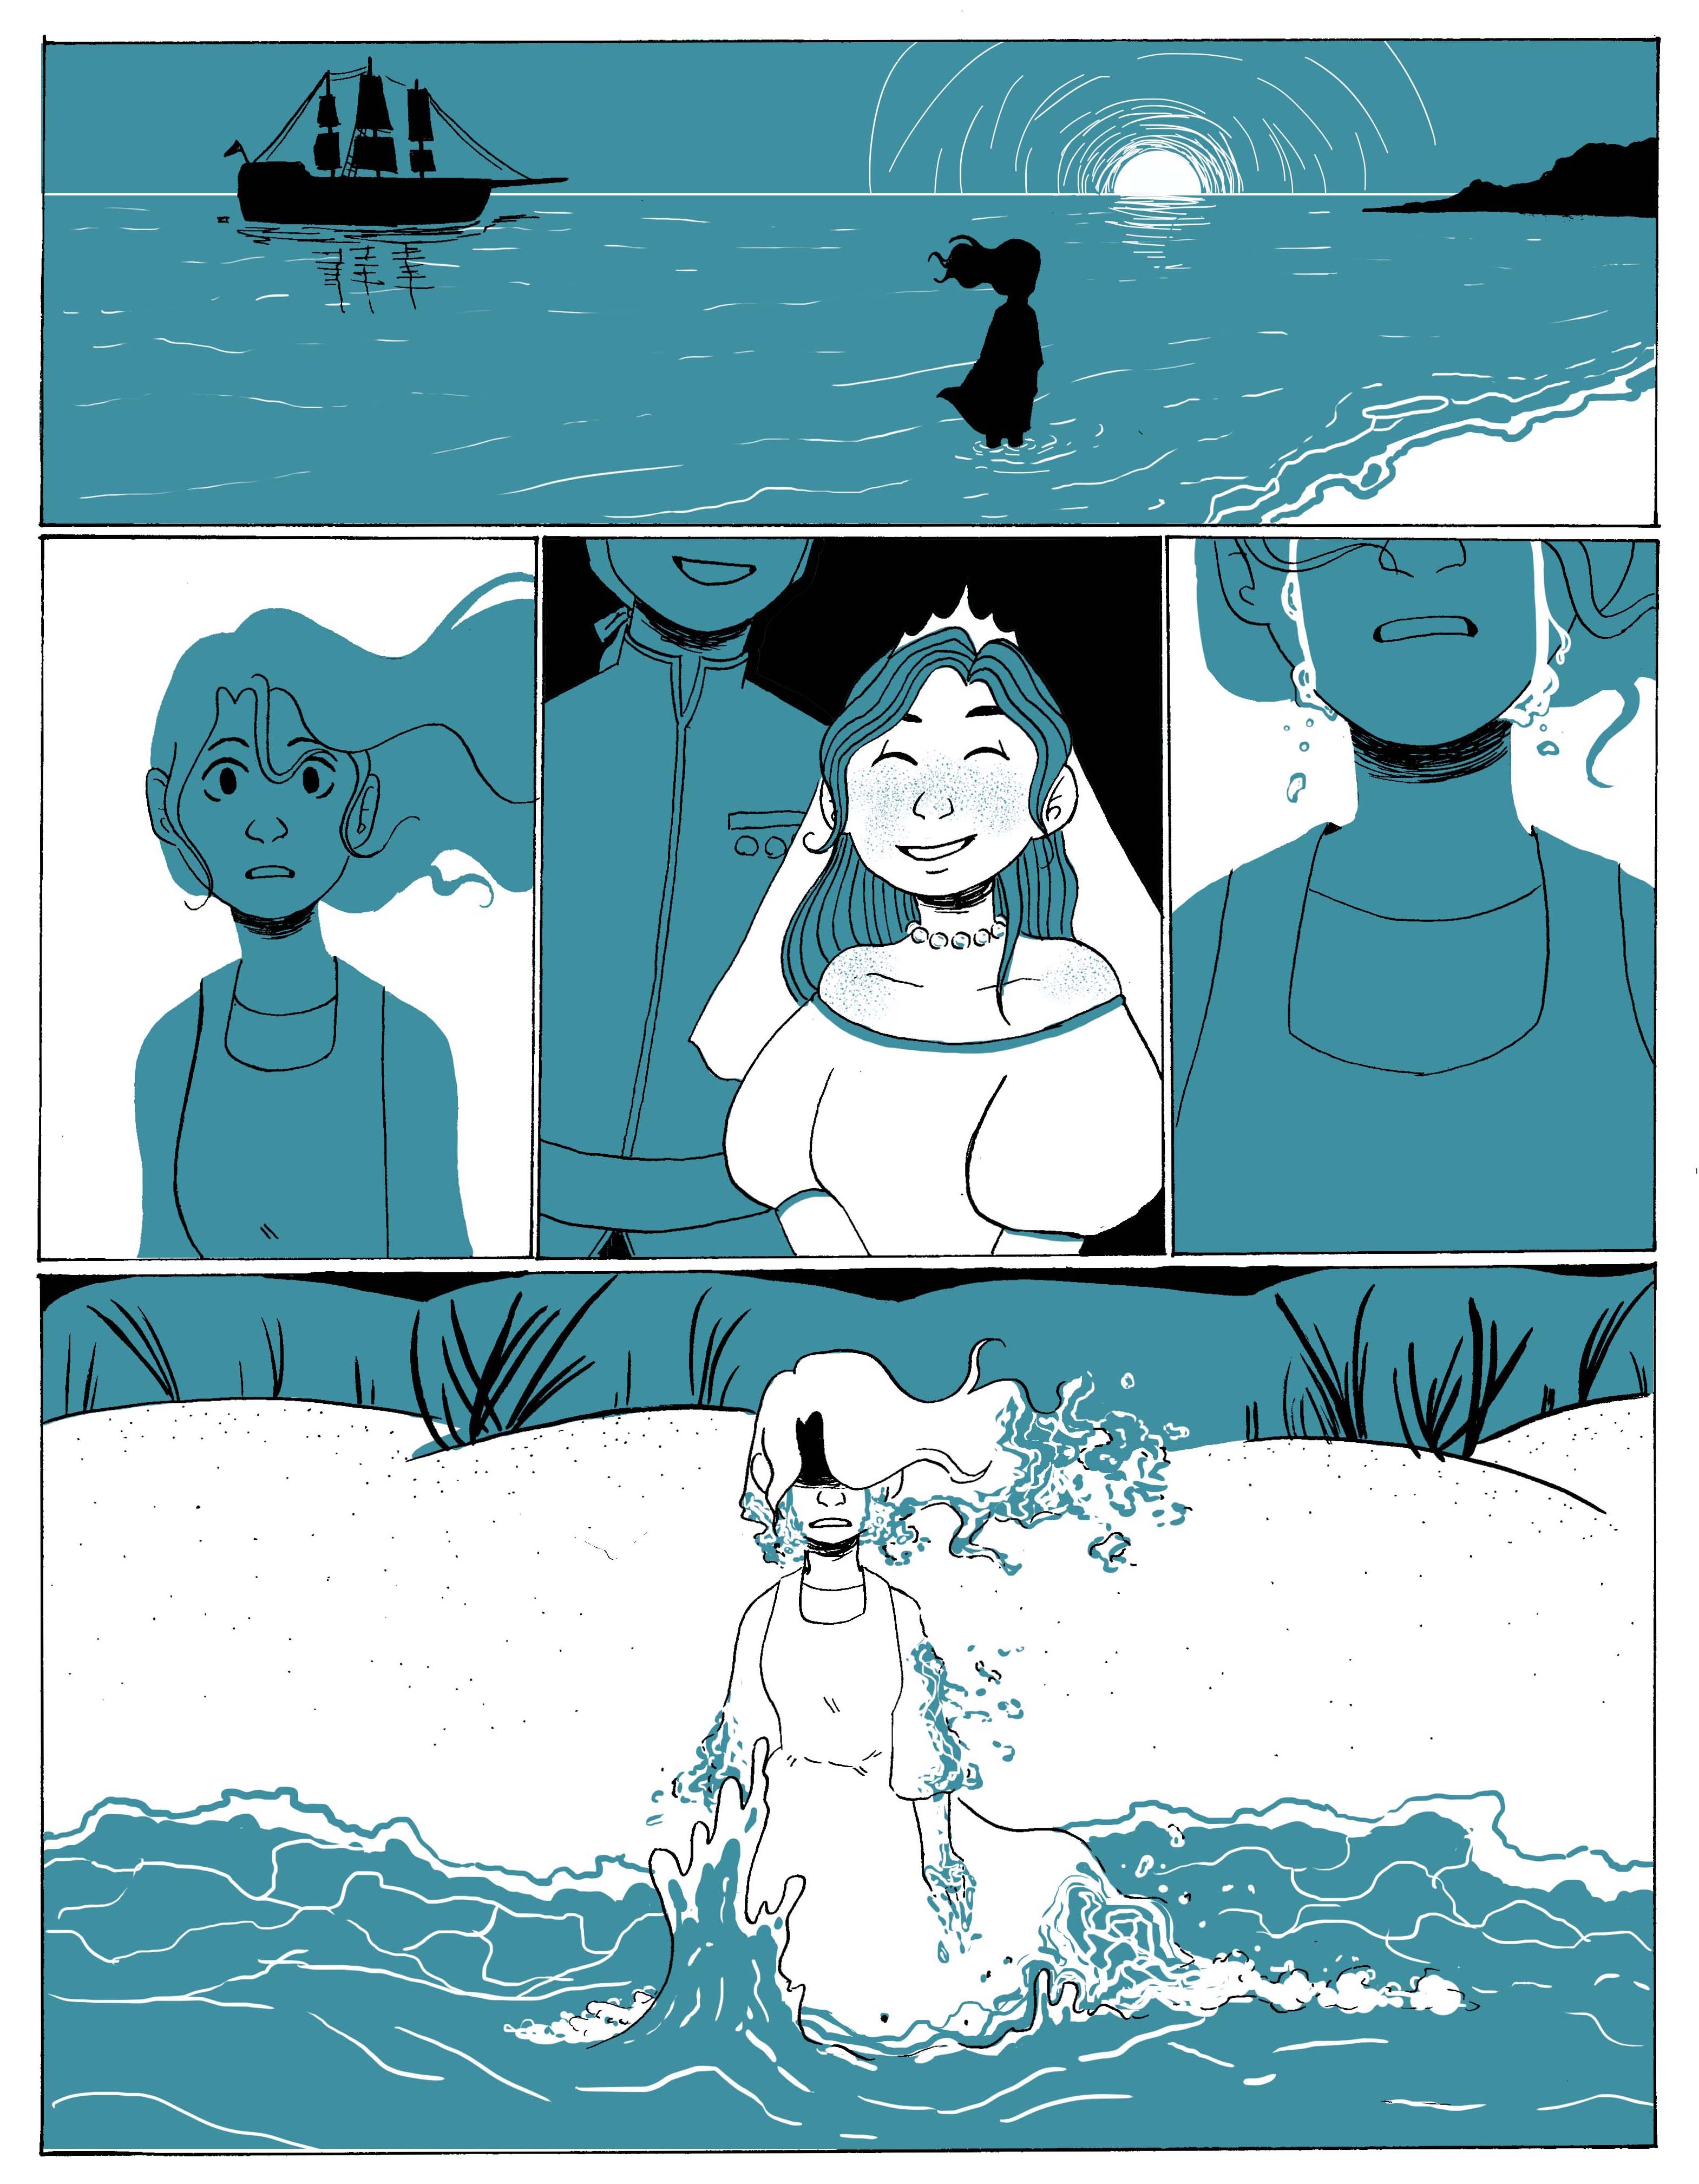 1 of 4 comic pages by Molly Jurewicz